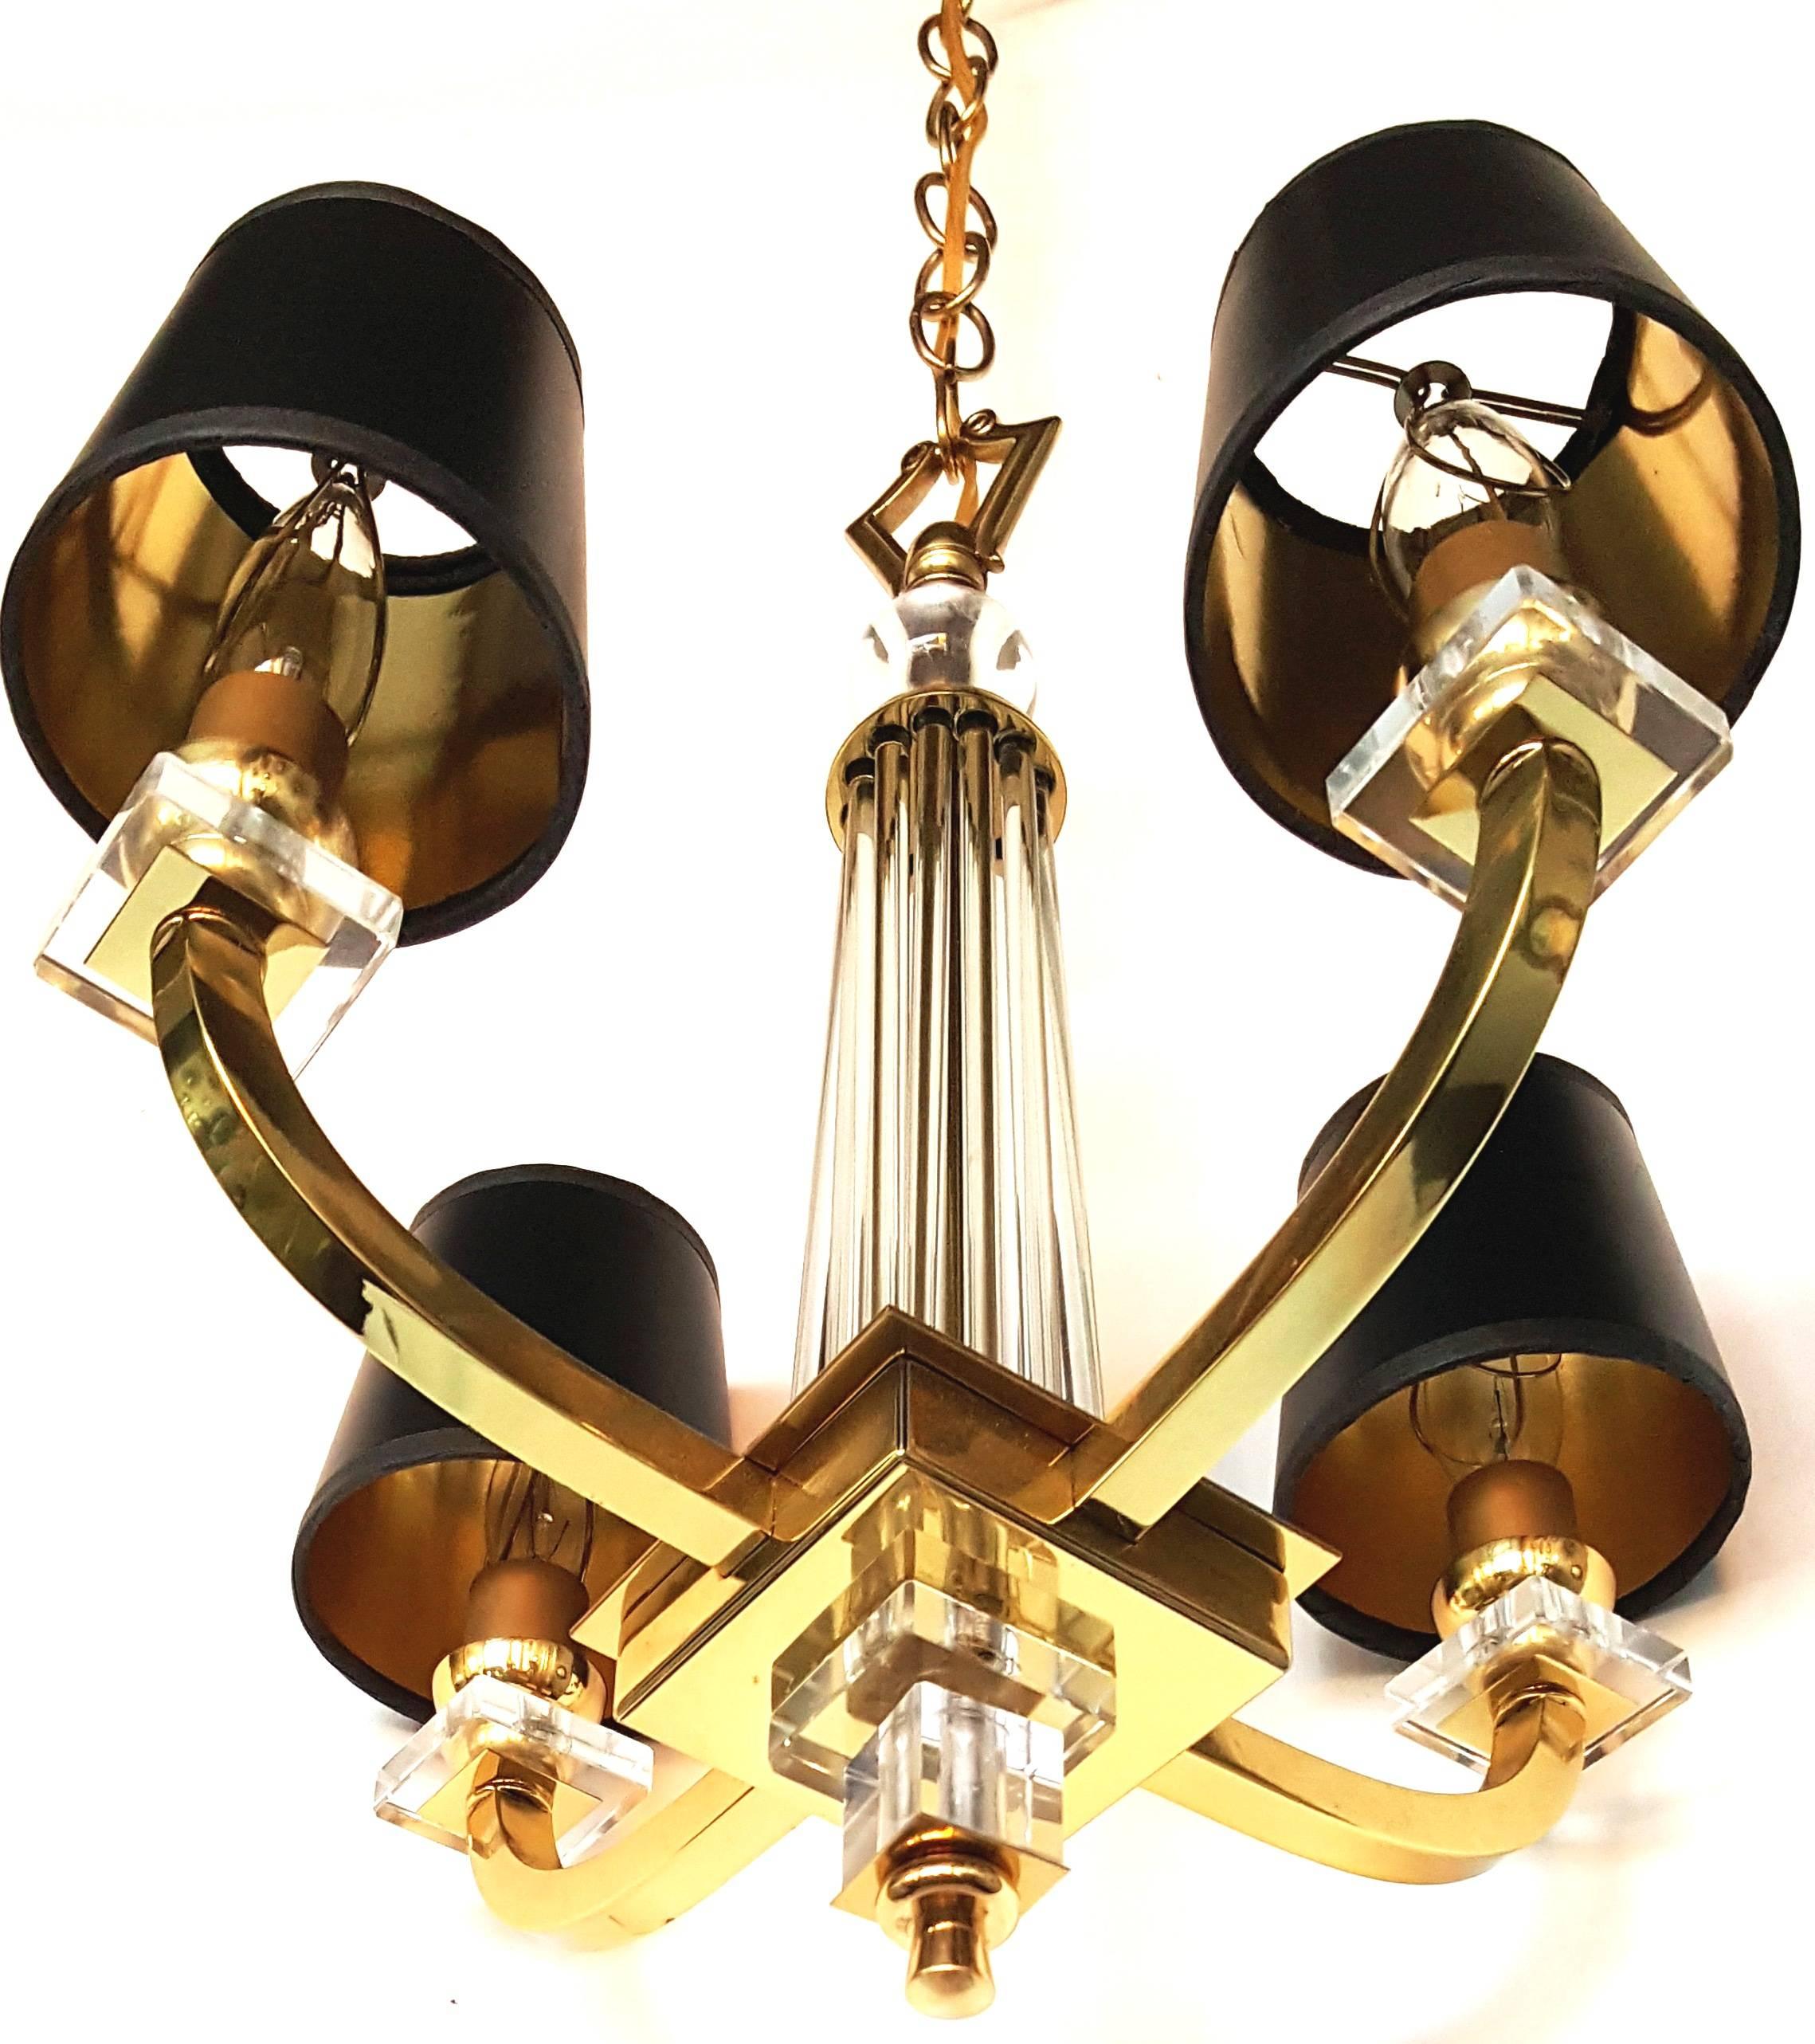 Superb pair of chandelier in the style of Jacques Adnet, brass frame and glass
Rods
four lights, 75 watts per light.
US rewired and in working condition
Two pairs available. Priced by pair.
